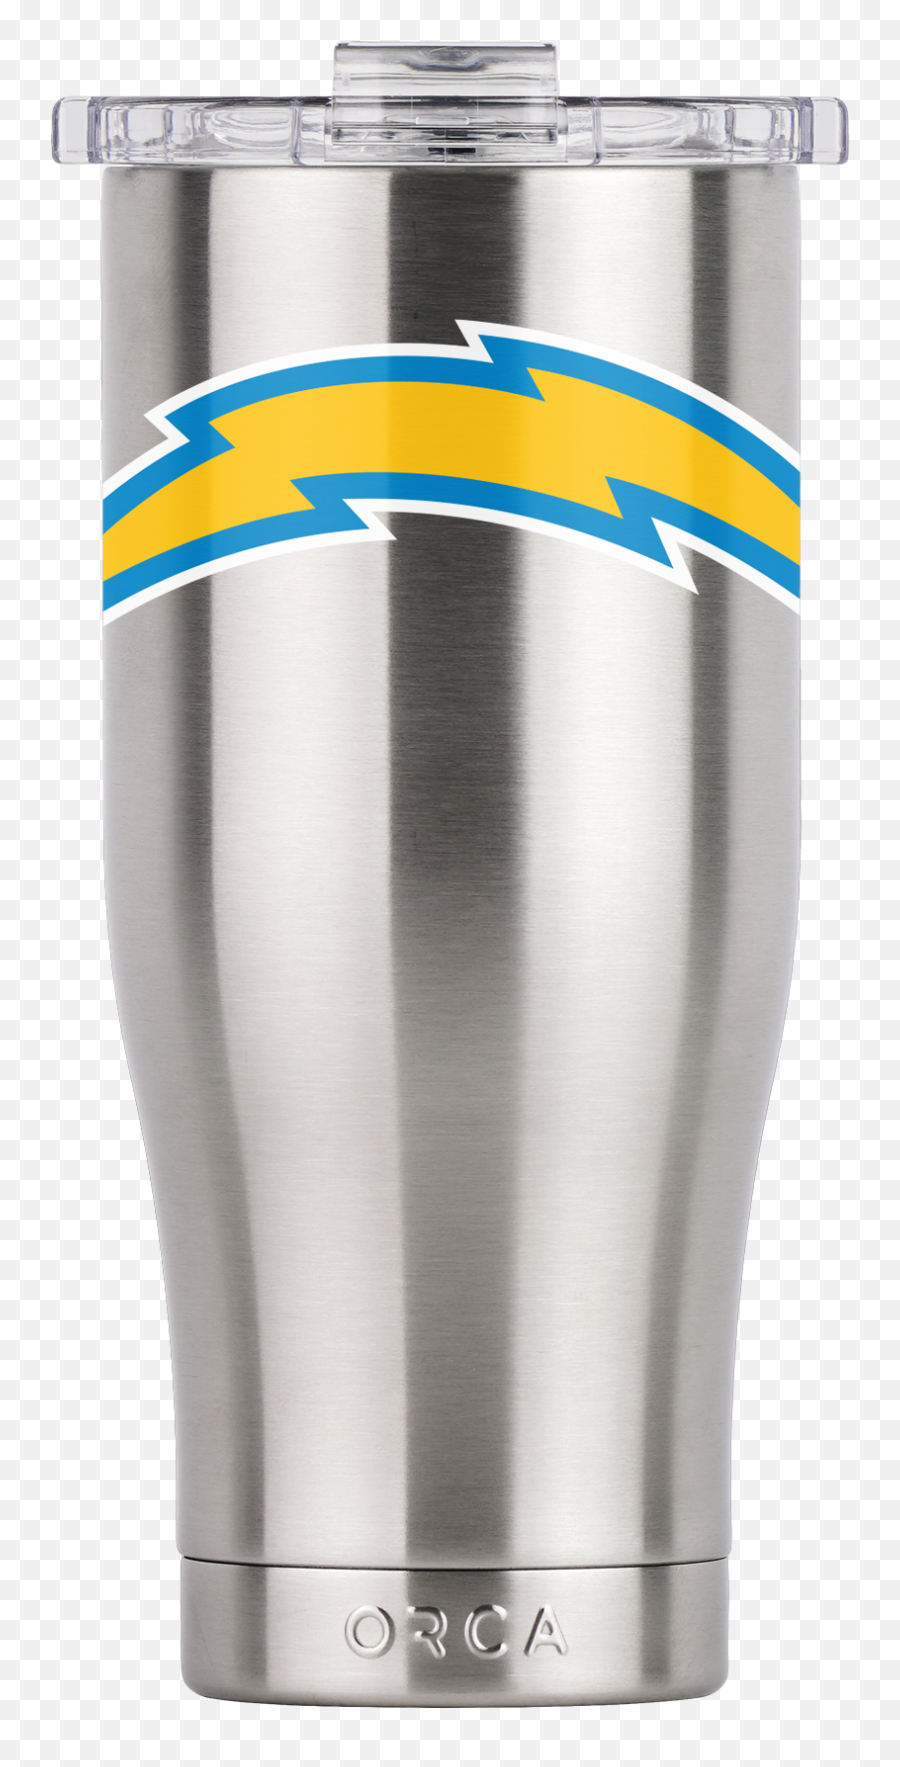 Los Angeles Chargers - Orca Cylinder Emoji,Los Angeles Chargers Logo